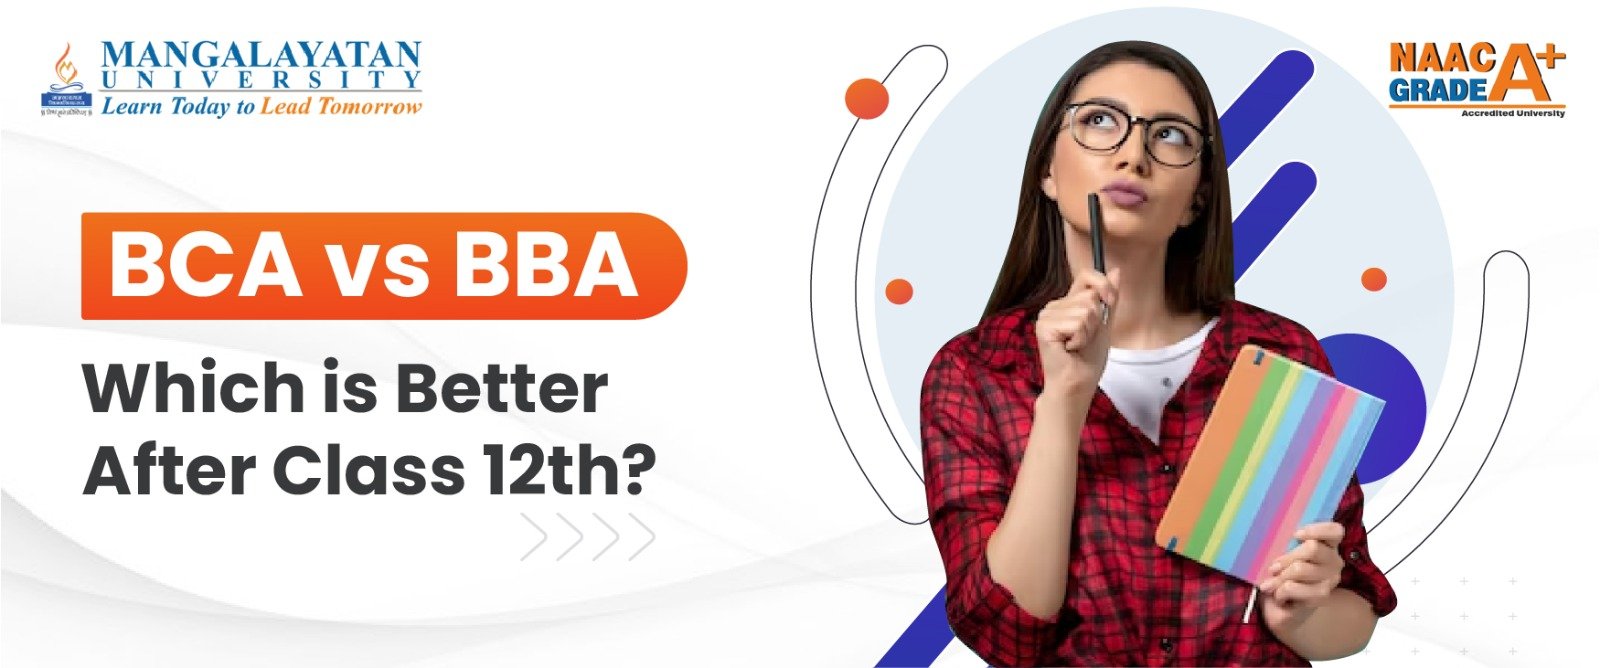 BCA vs BBA: Which is Better After Class 12th?